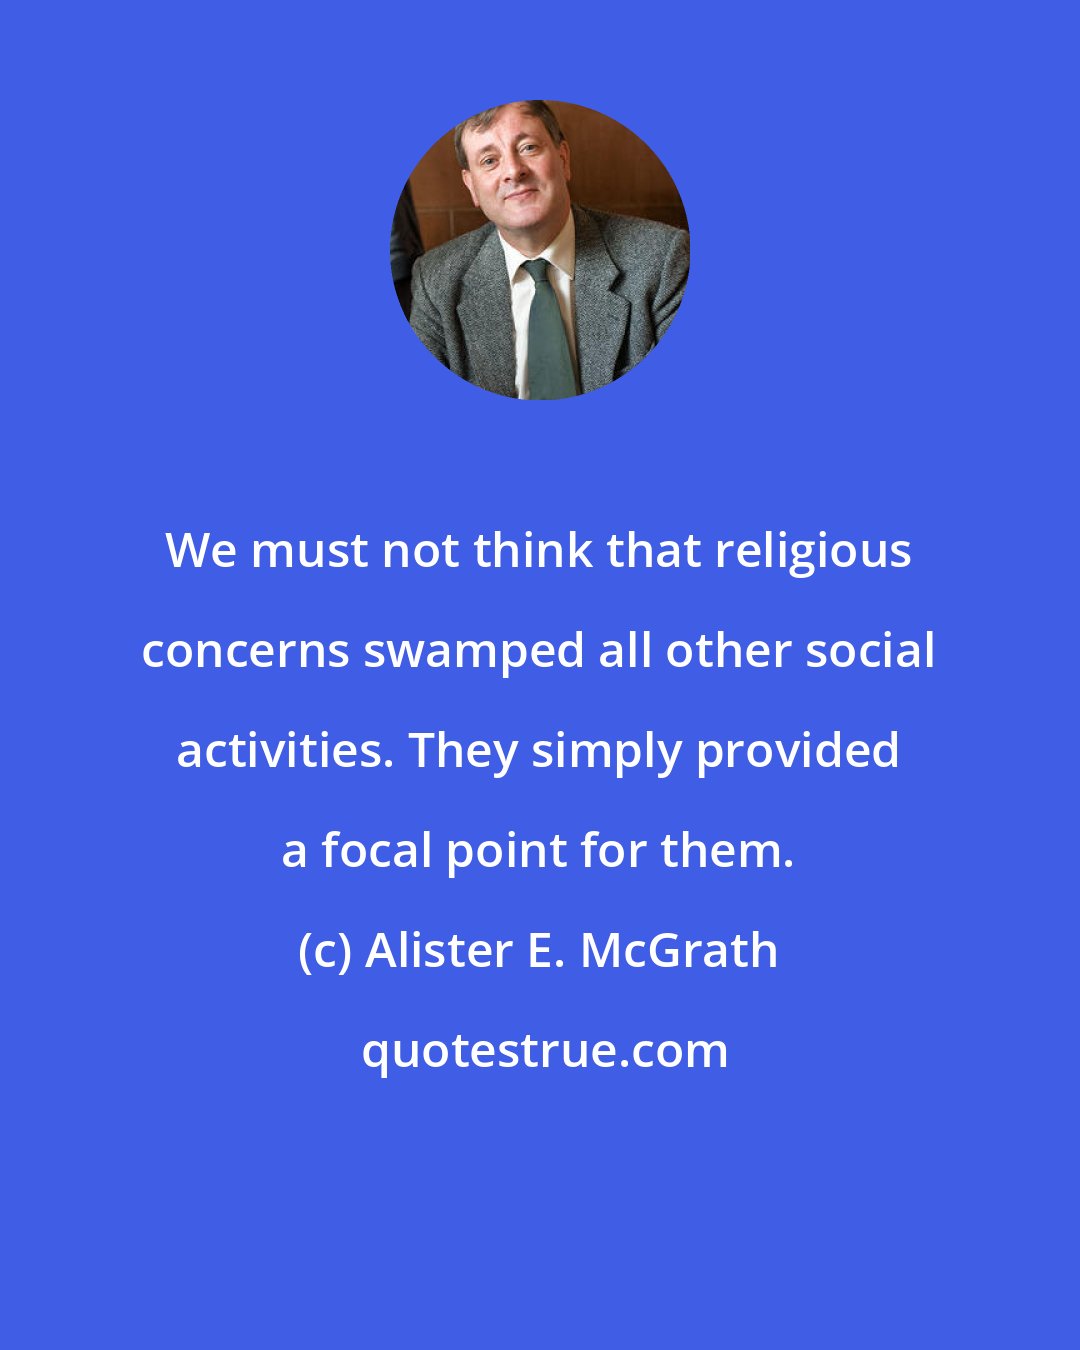 Alister E. McGrath: We must not think that religious concerns swamped all other social activities. They simply provided a focal point for them.